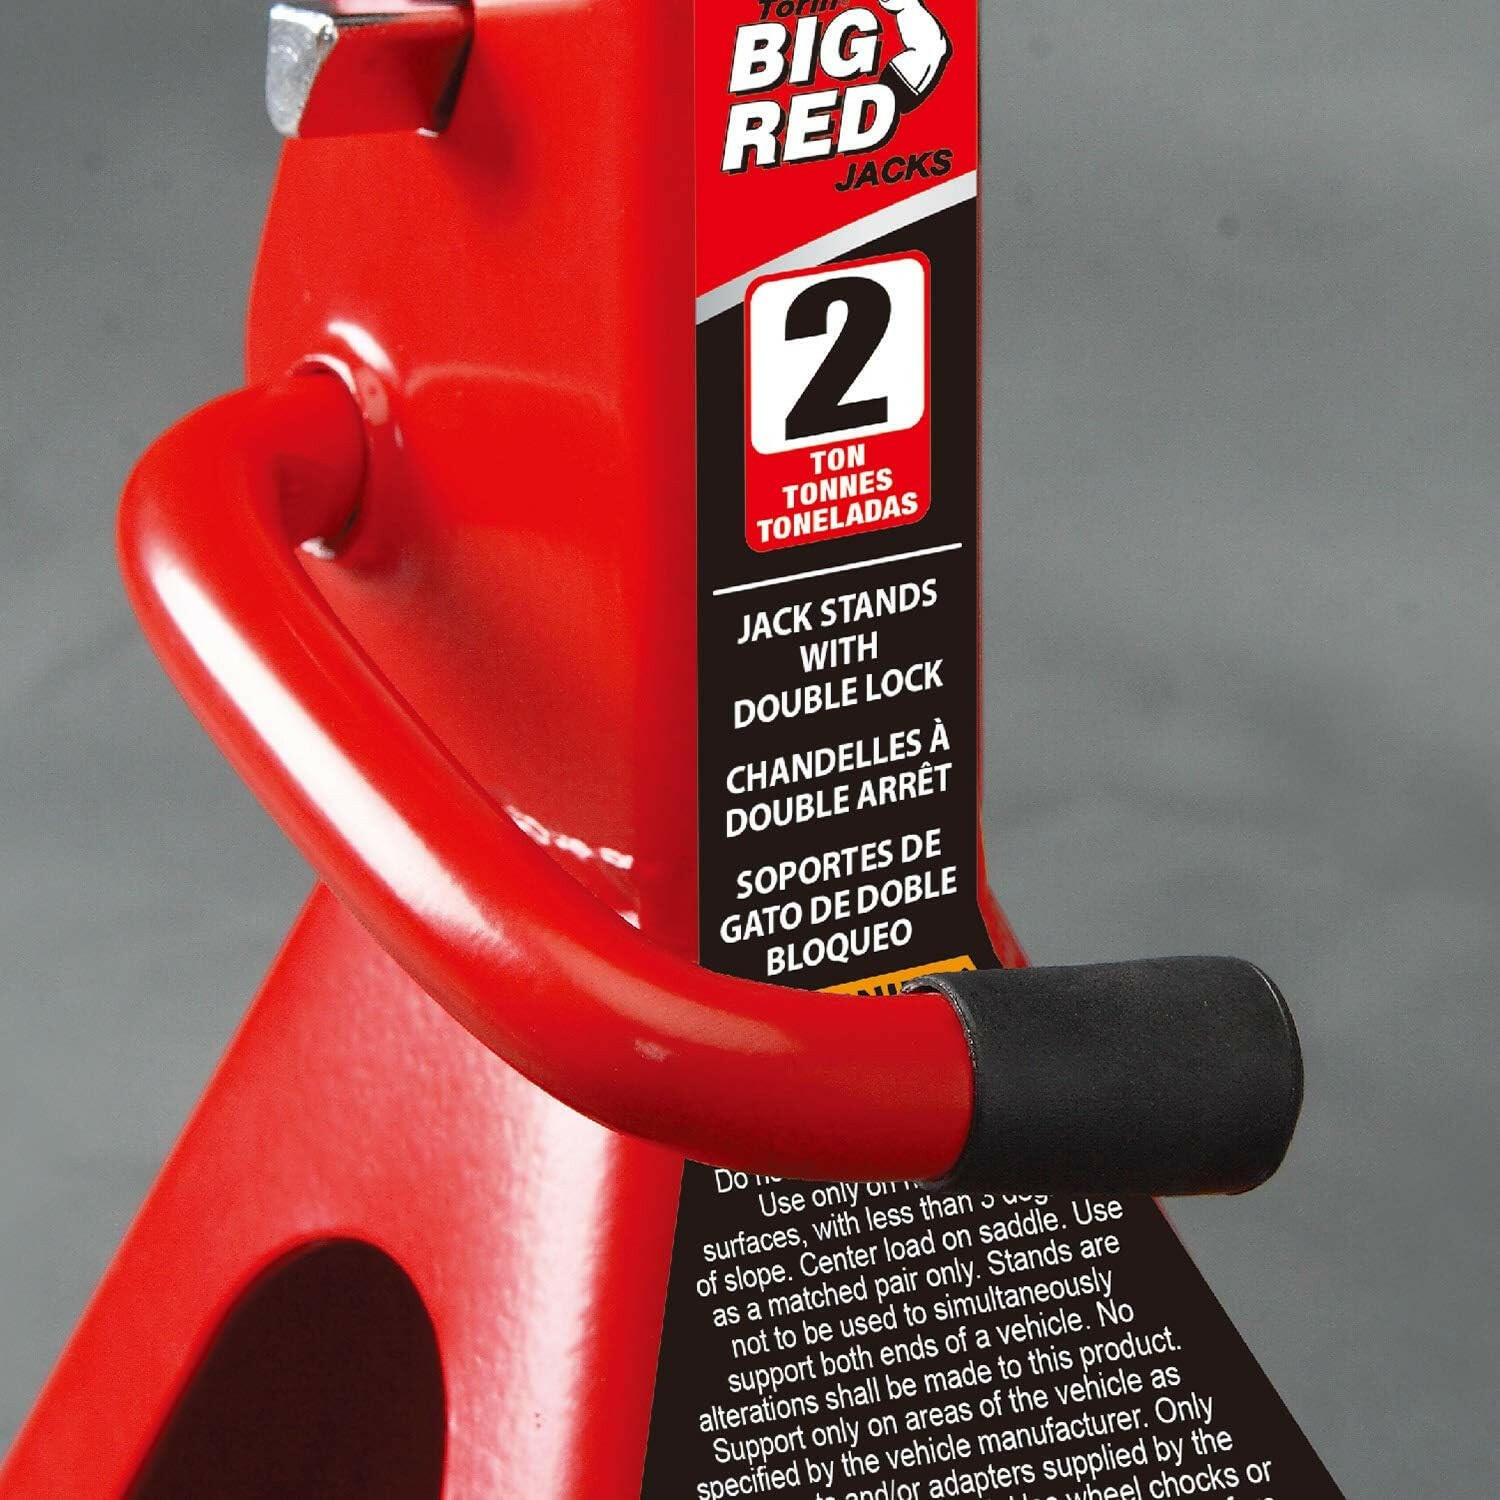 big-red-2-ton-double-locking-jack-stands